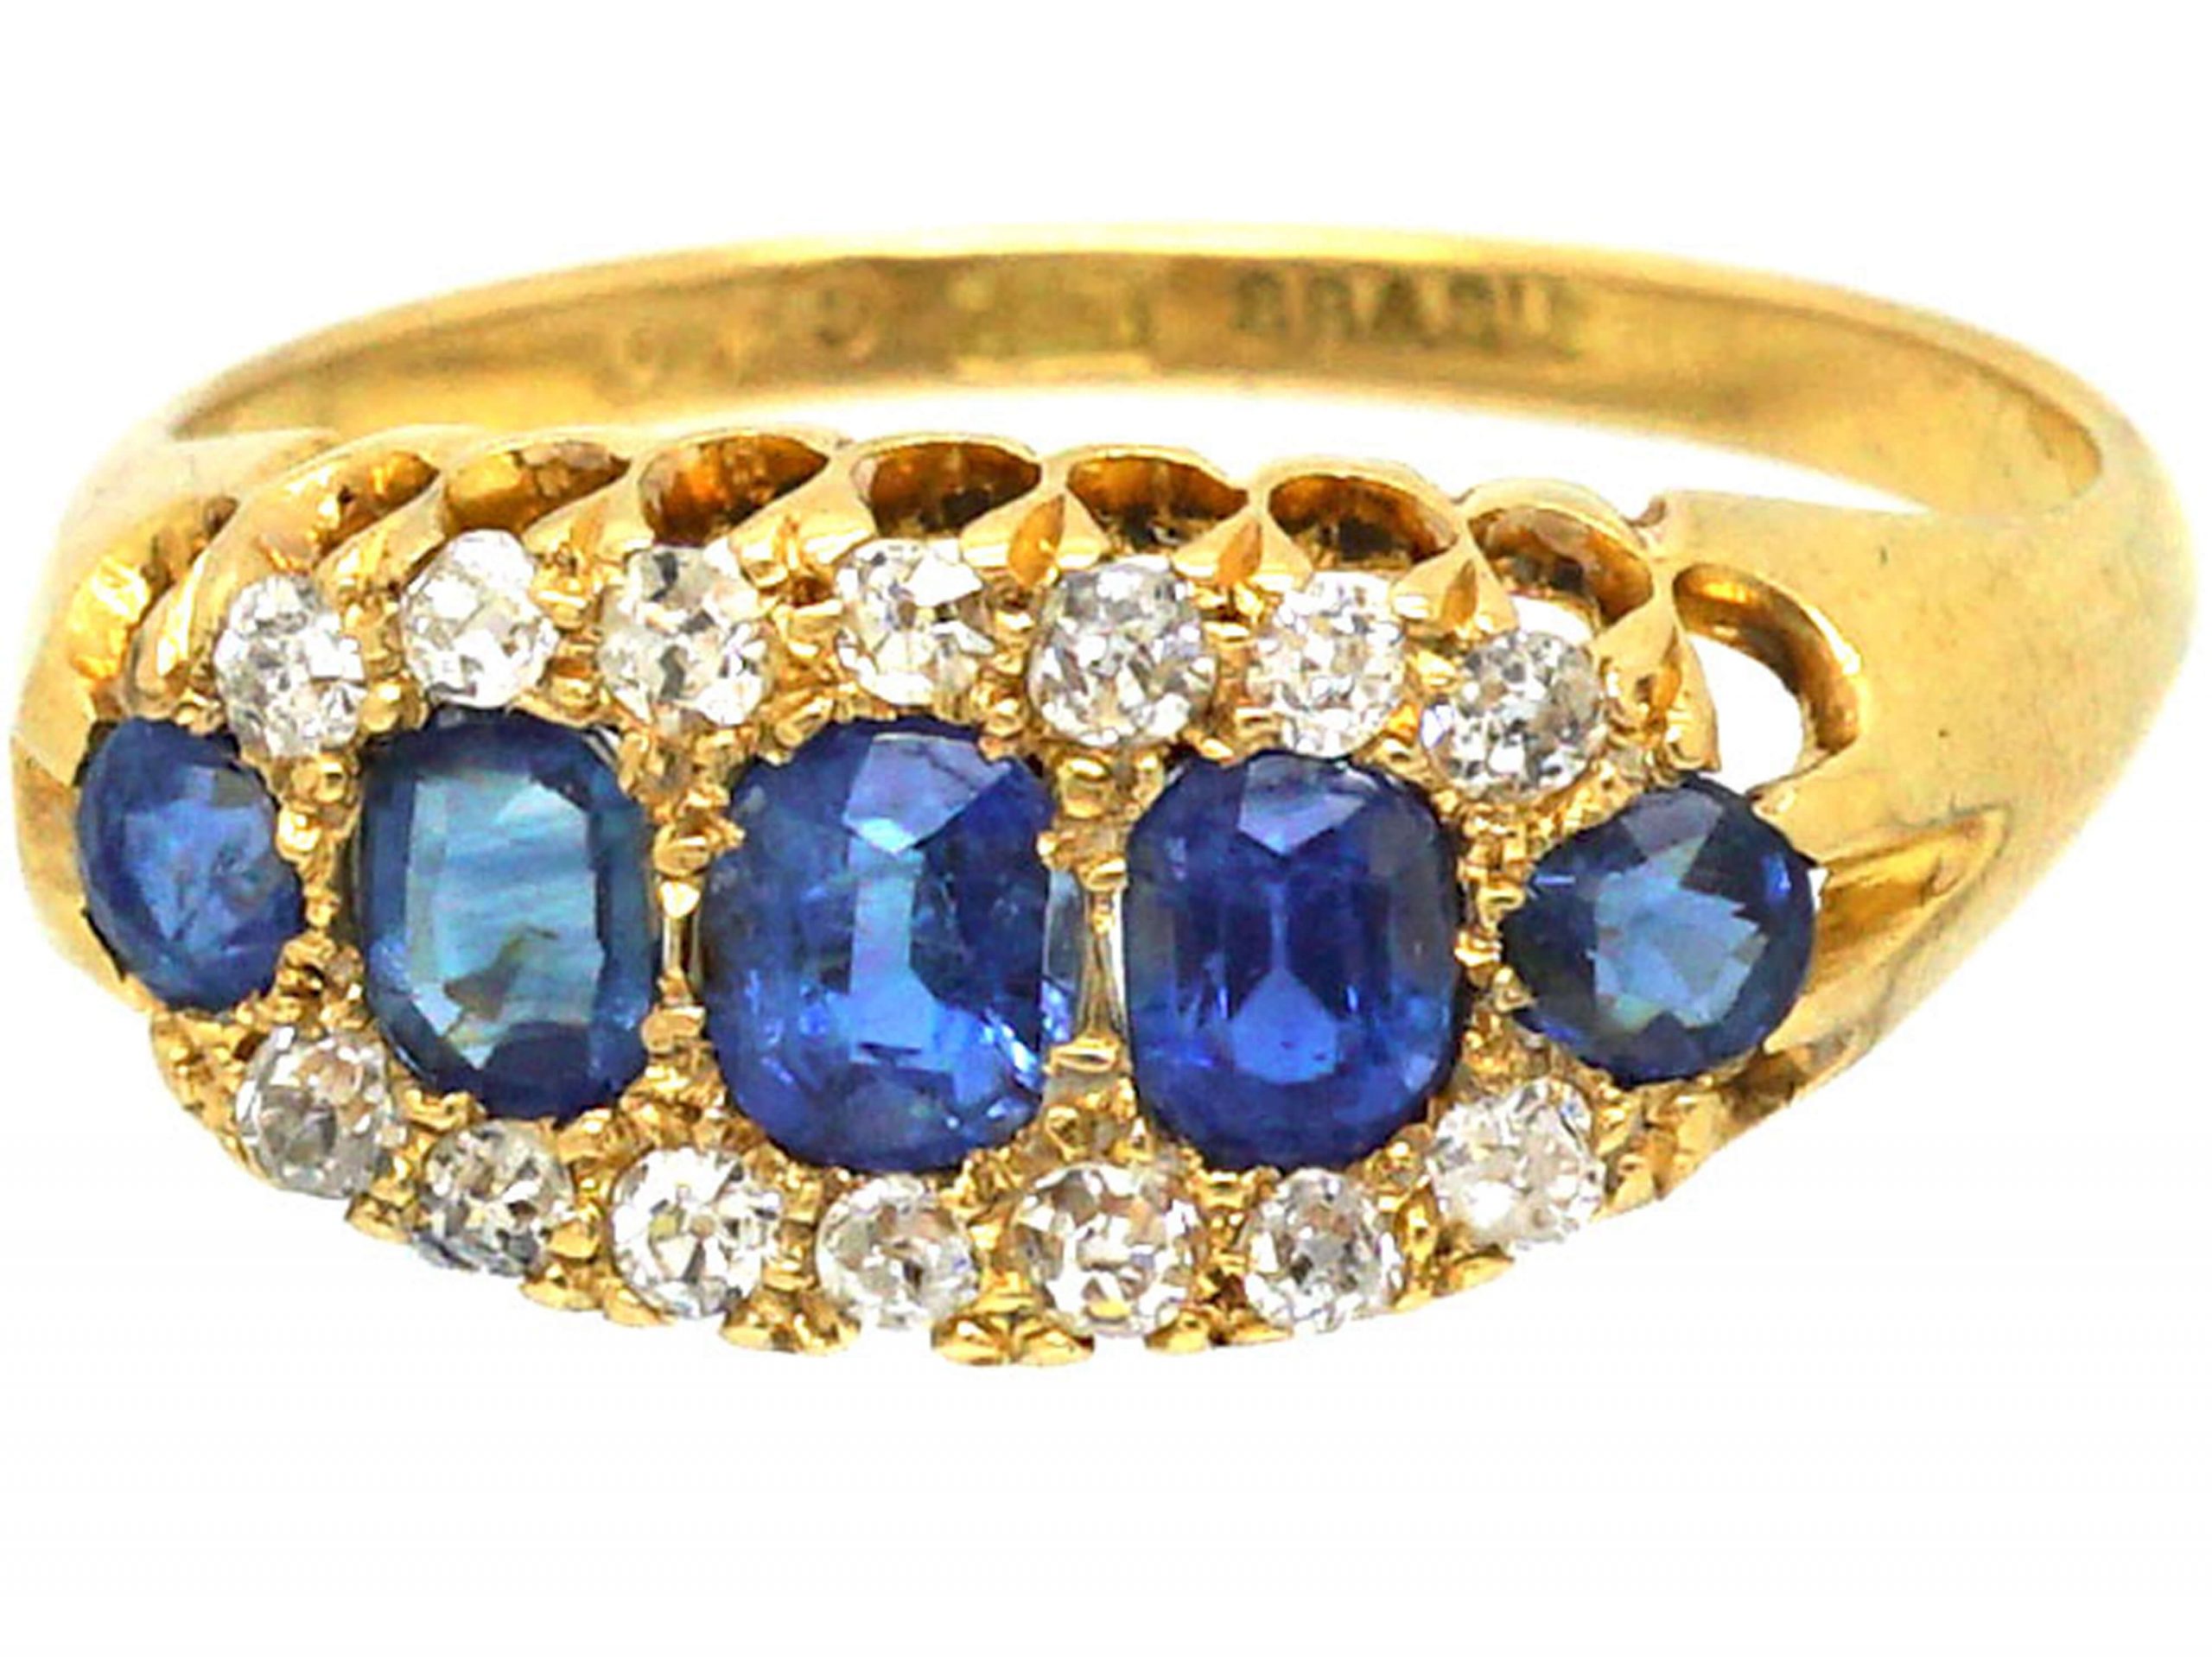 Edwardian 18ct Gold Sapphire & Diamond Boat Shaped Ring (319S) | The ...